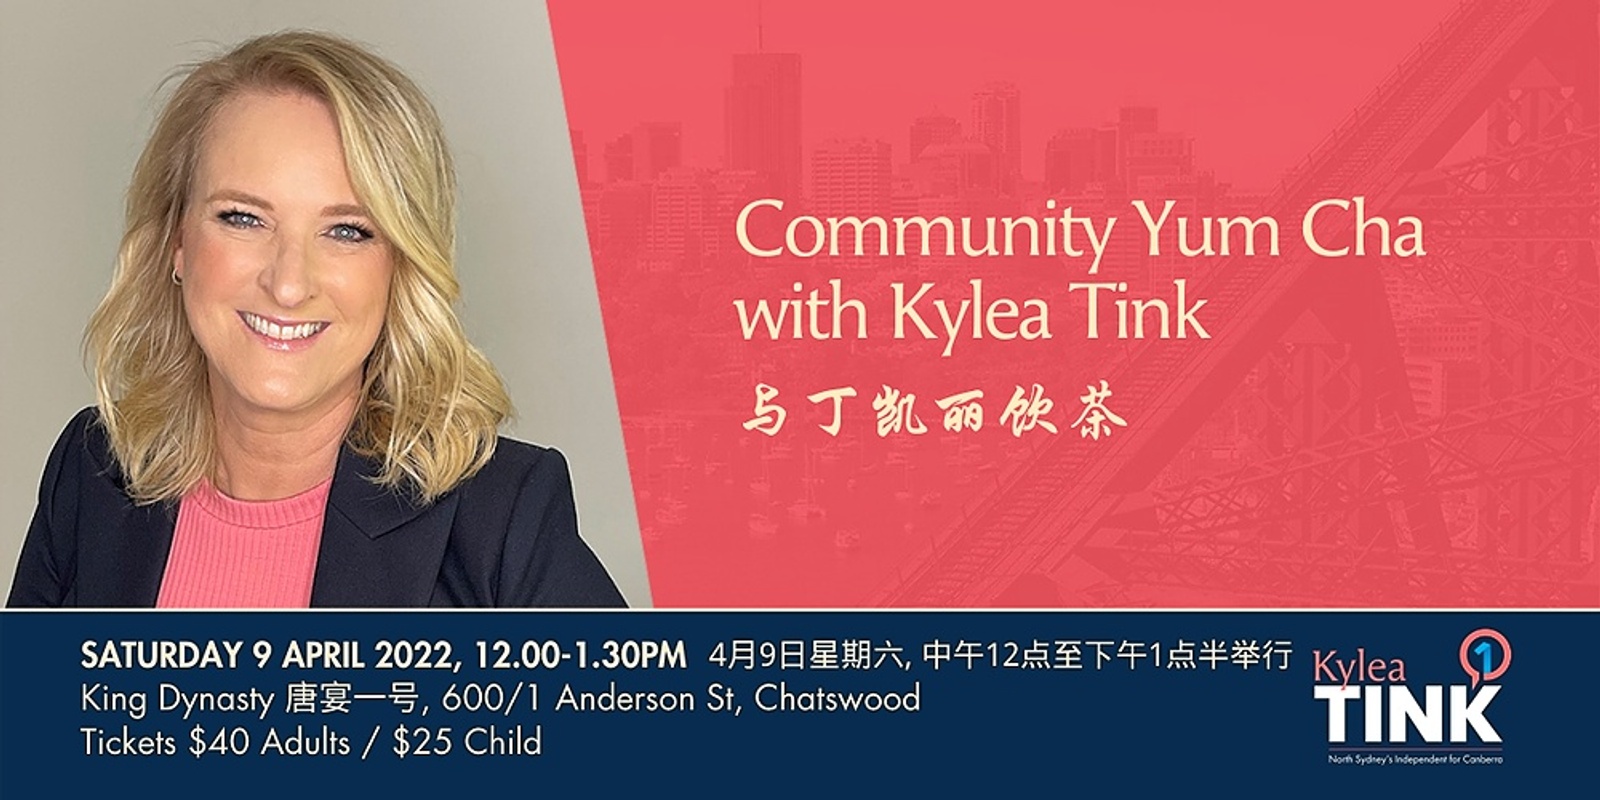 Banner image for Yum Cha with Kylea Tink